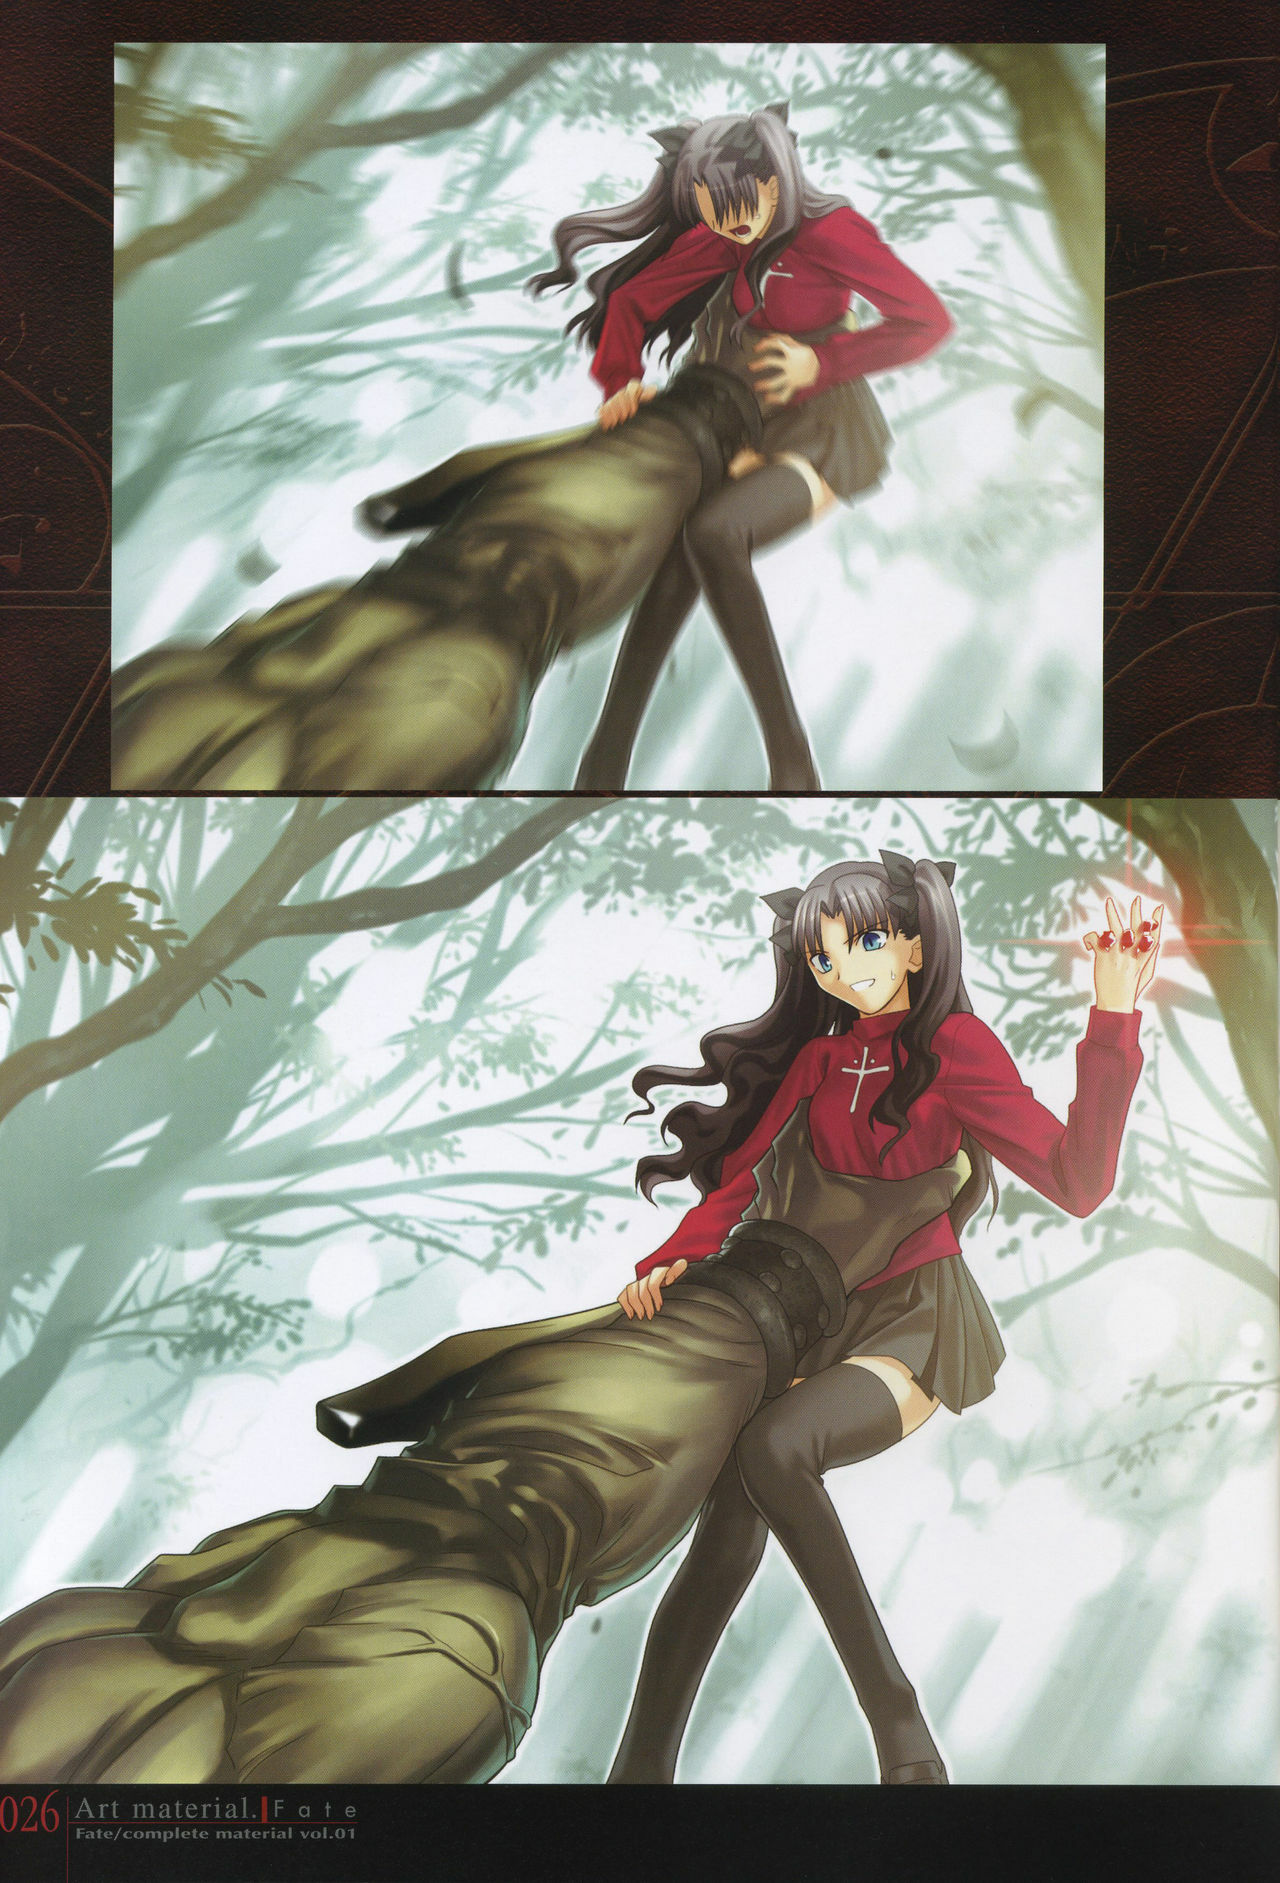 [Type-Moon] Fate/complete material I - Art material. page 31 full